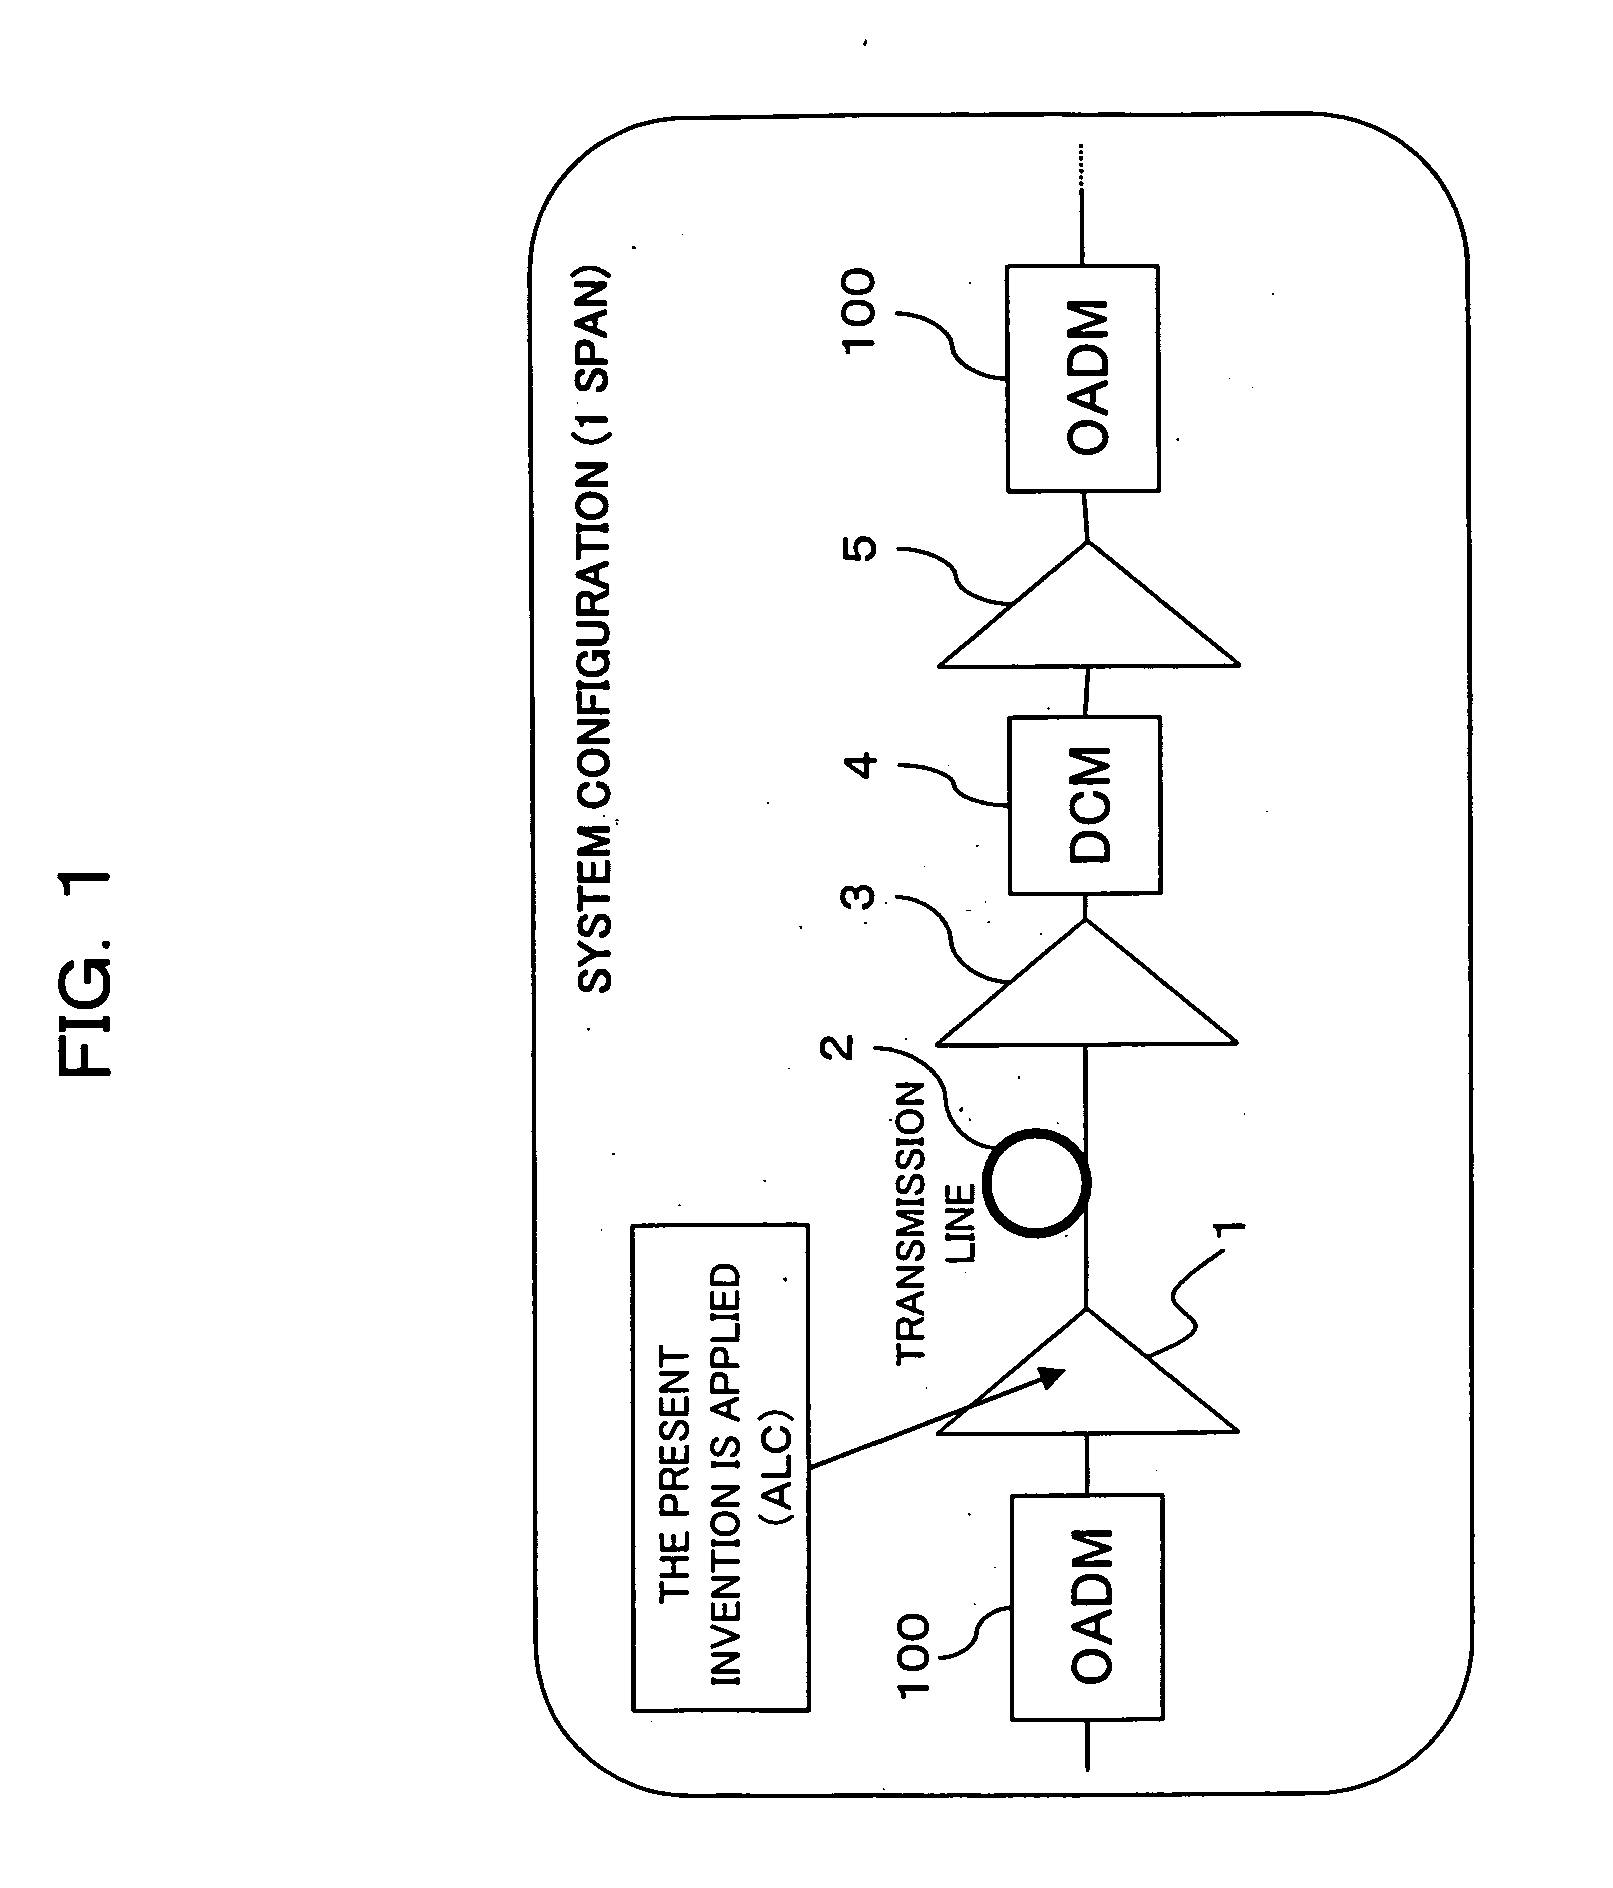 Control apparatus and method for optical amplifier, optical amplifier, optical transmission apparatus, individual band gain equalizer, wavelength multiplexing transmission apparatus, optical amplifier and wavelength multiplexing transmission system using the same equalizer